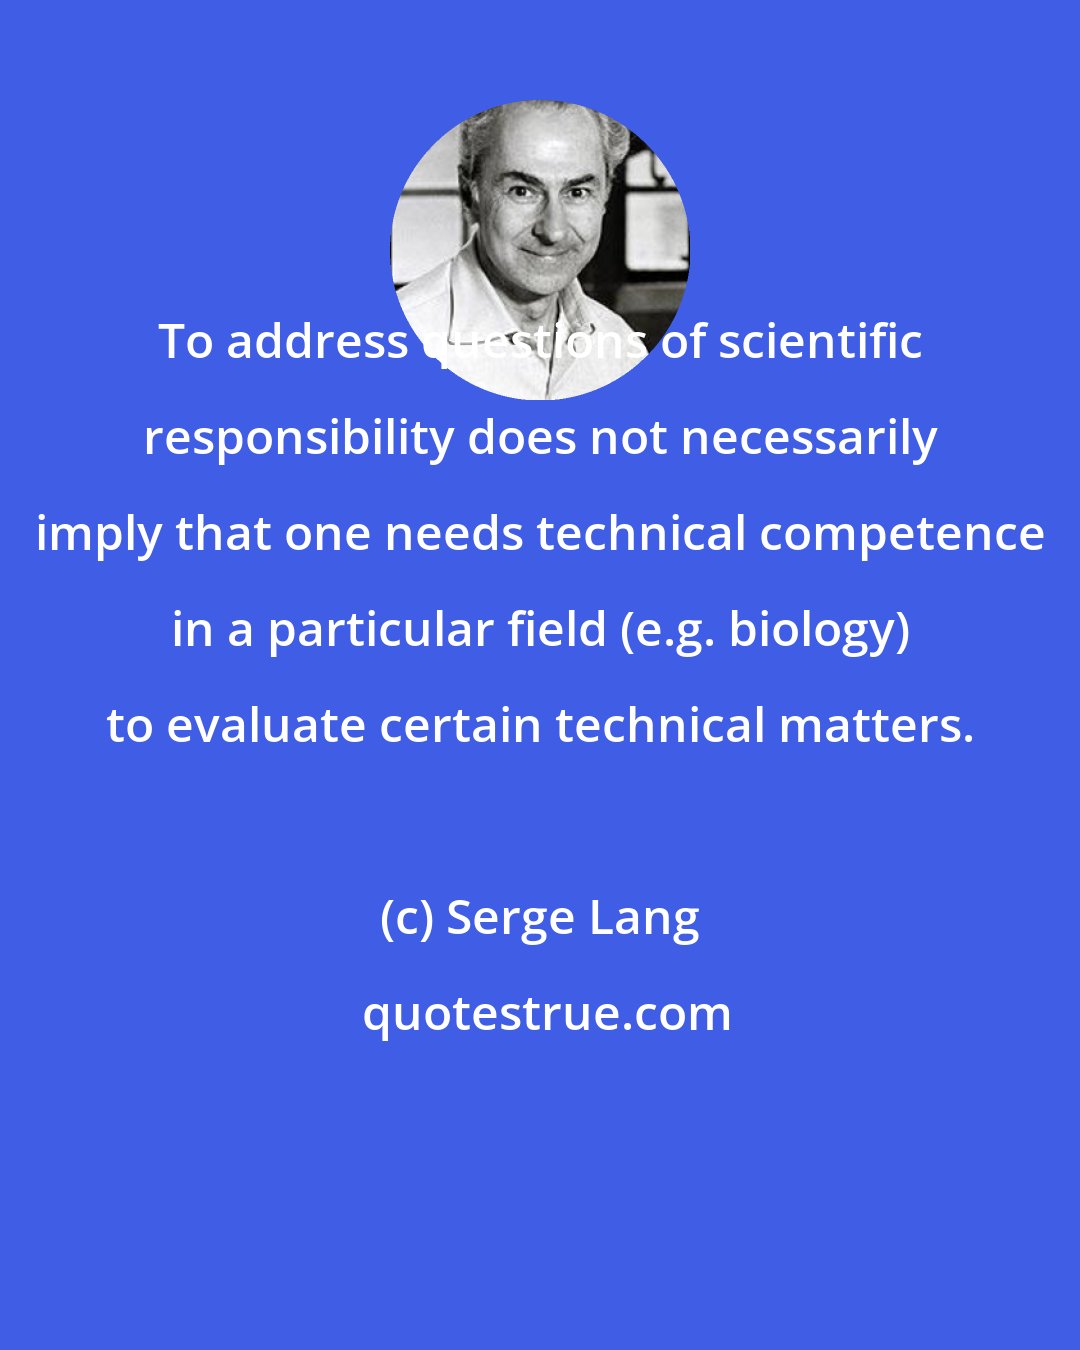 Serge Lang: To address questions of scientific responsibility does not necessarily imply that one needs technical competence in a particular field (e.g. biology) to evaluate certain technical matters.